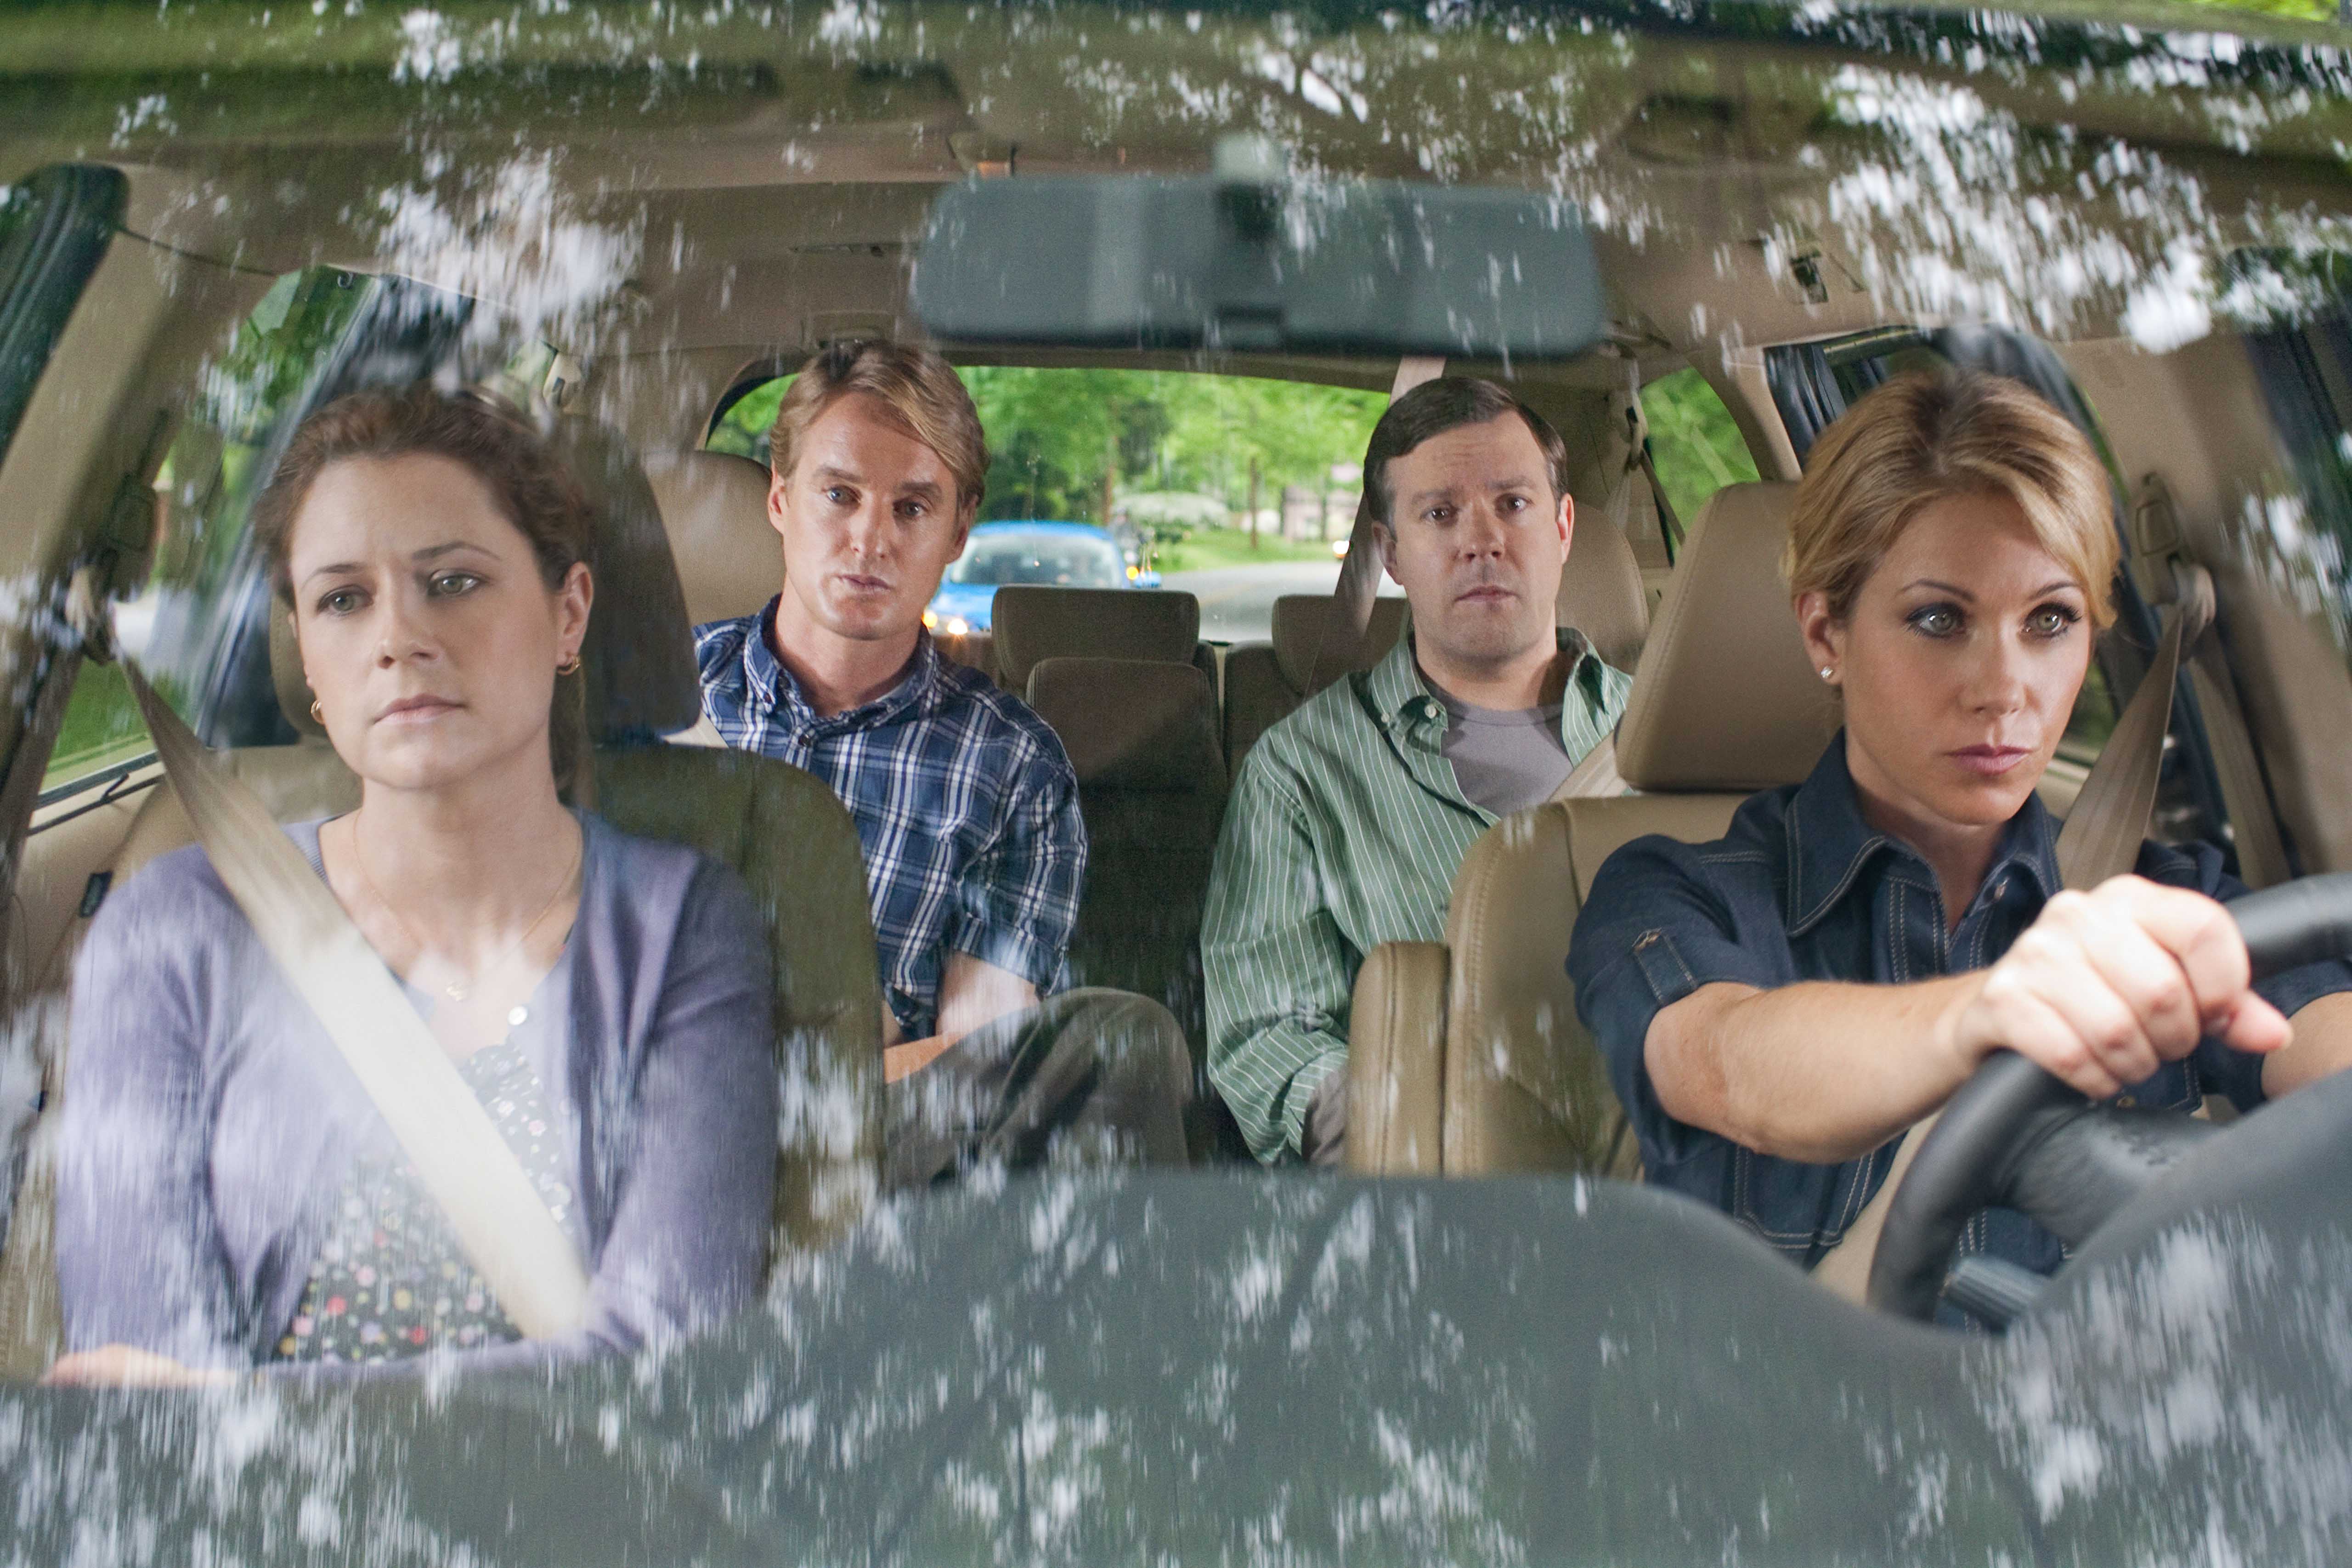  Jenna Fischer as Maggie, Owen Wilson as Rick, Jason Sudeikis as Fred and Christina Applegate as Grace in New Line Cinema's comedy HALL PASS, a Warner Bros. Pictures release.